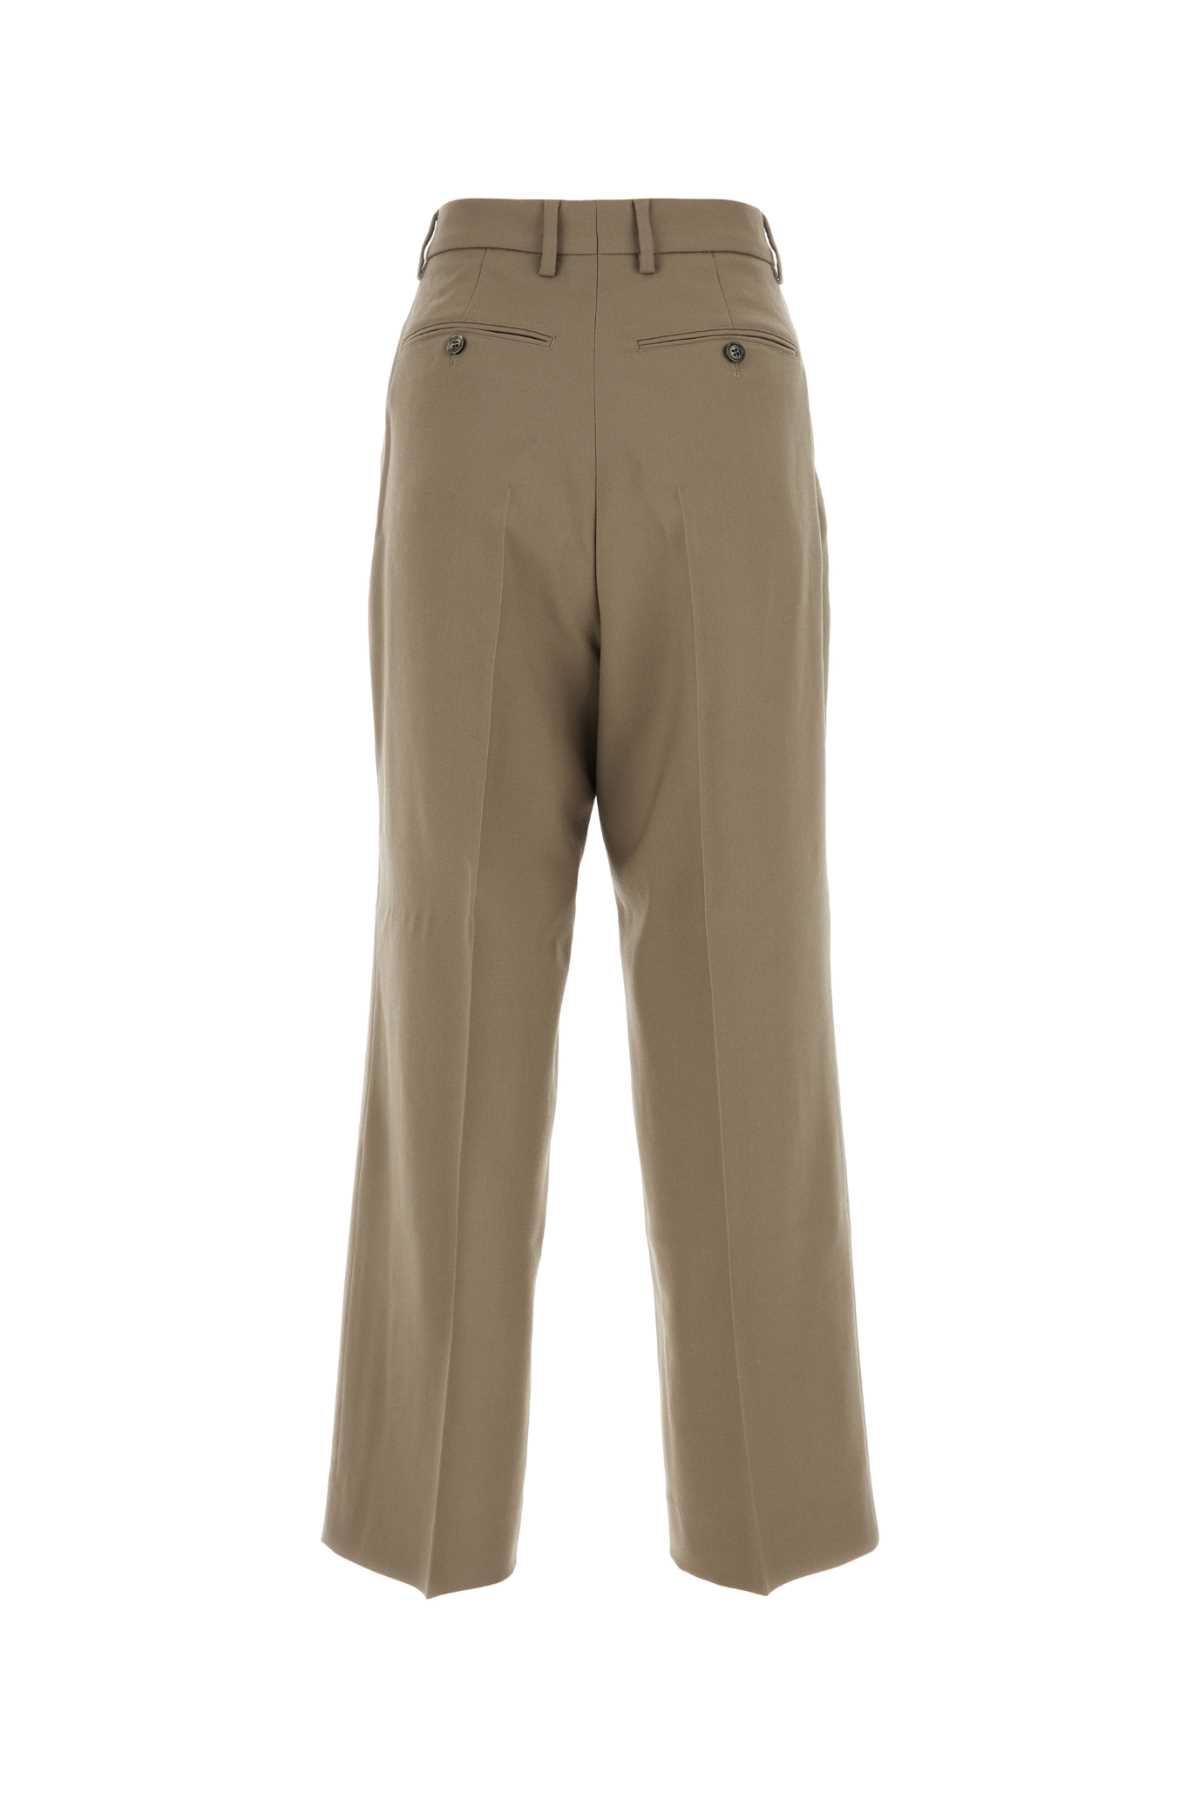 Ami Alexandre Mattiussi Dove Grey Wool Pant In Taupe